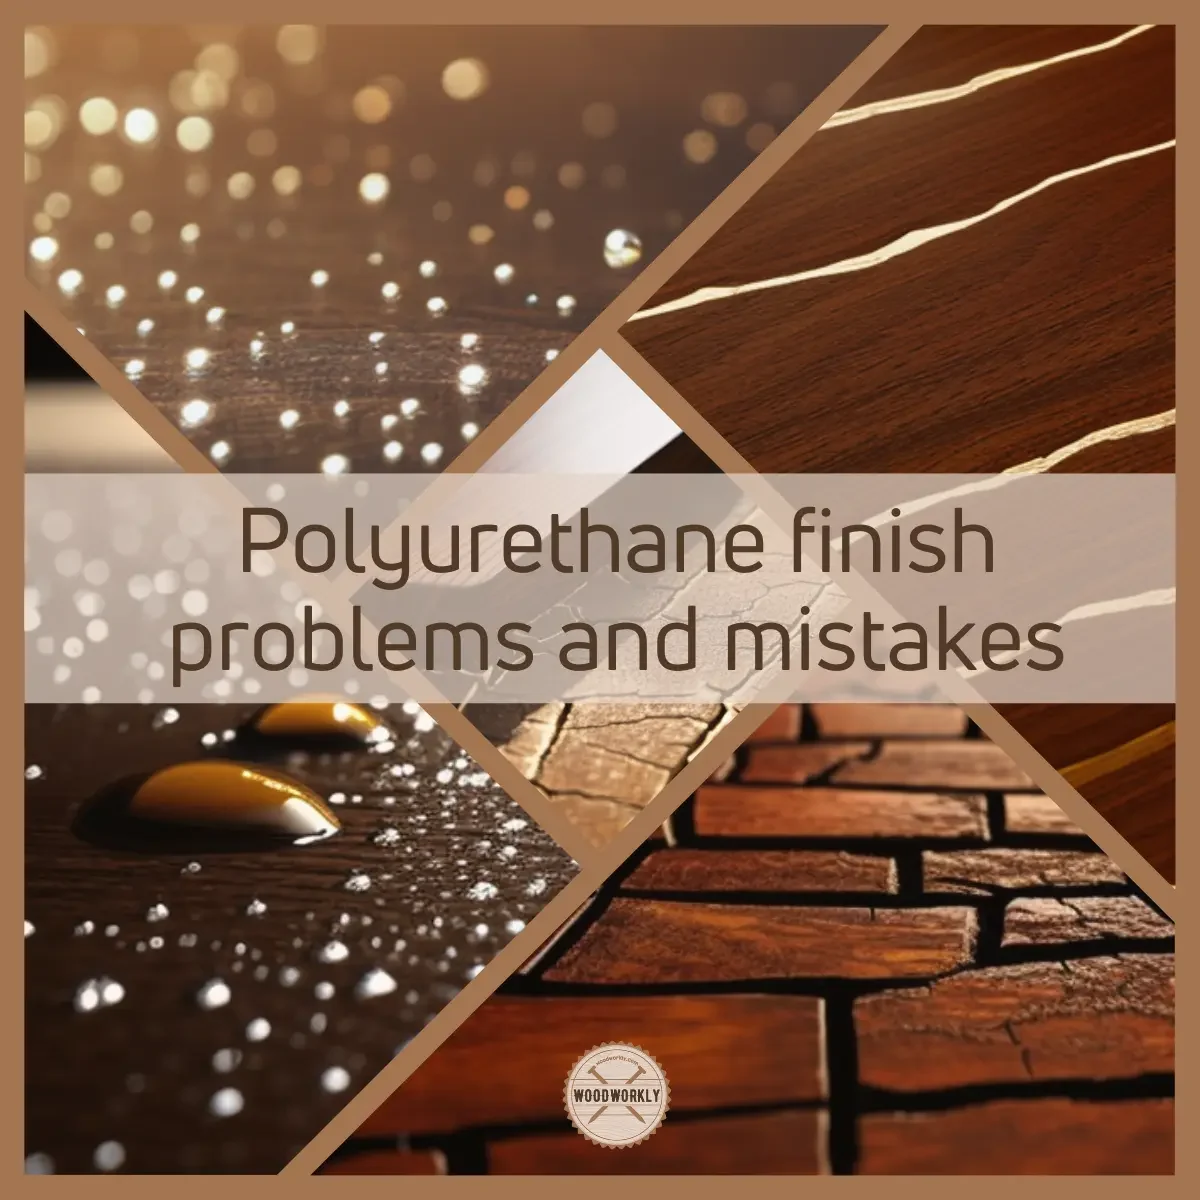 Polyurethane finish problems and mistakes